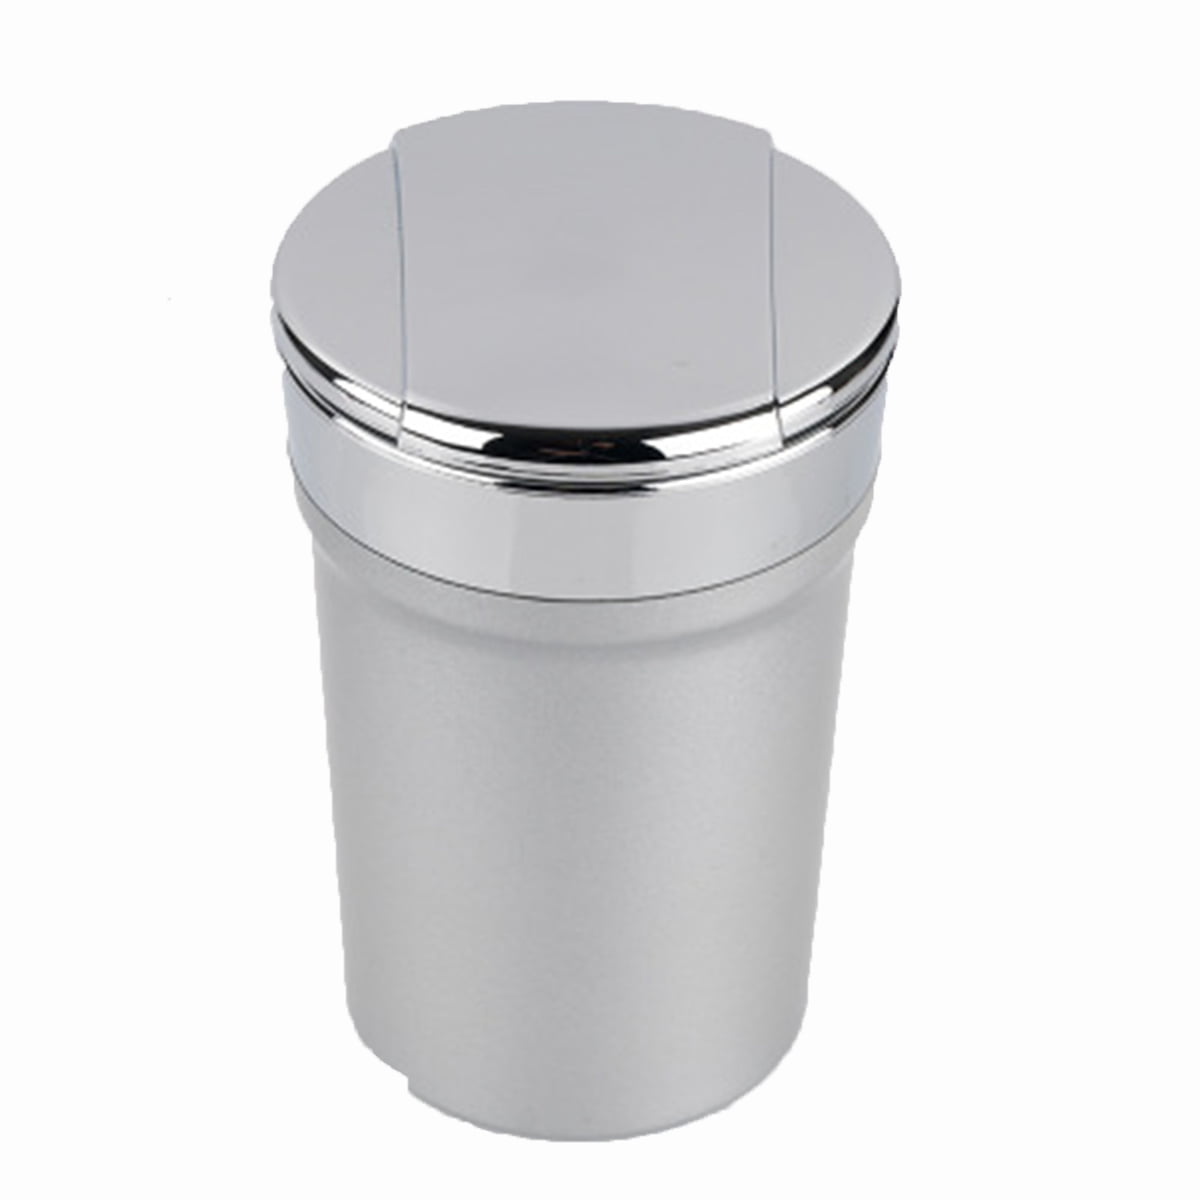 Stainless Steel Mini Trash Can Tabletop Cigar Ashtray Home Office Bar Car 